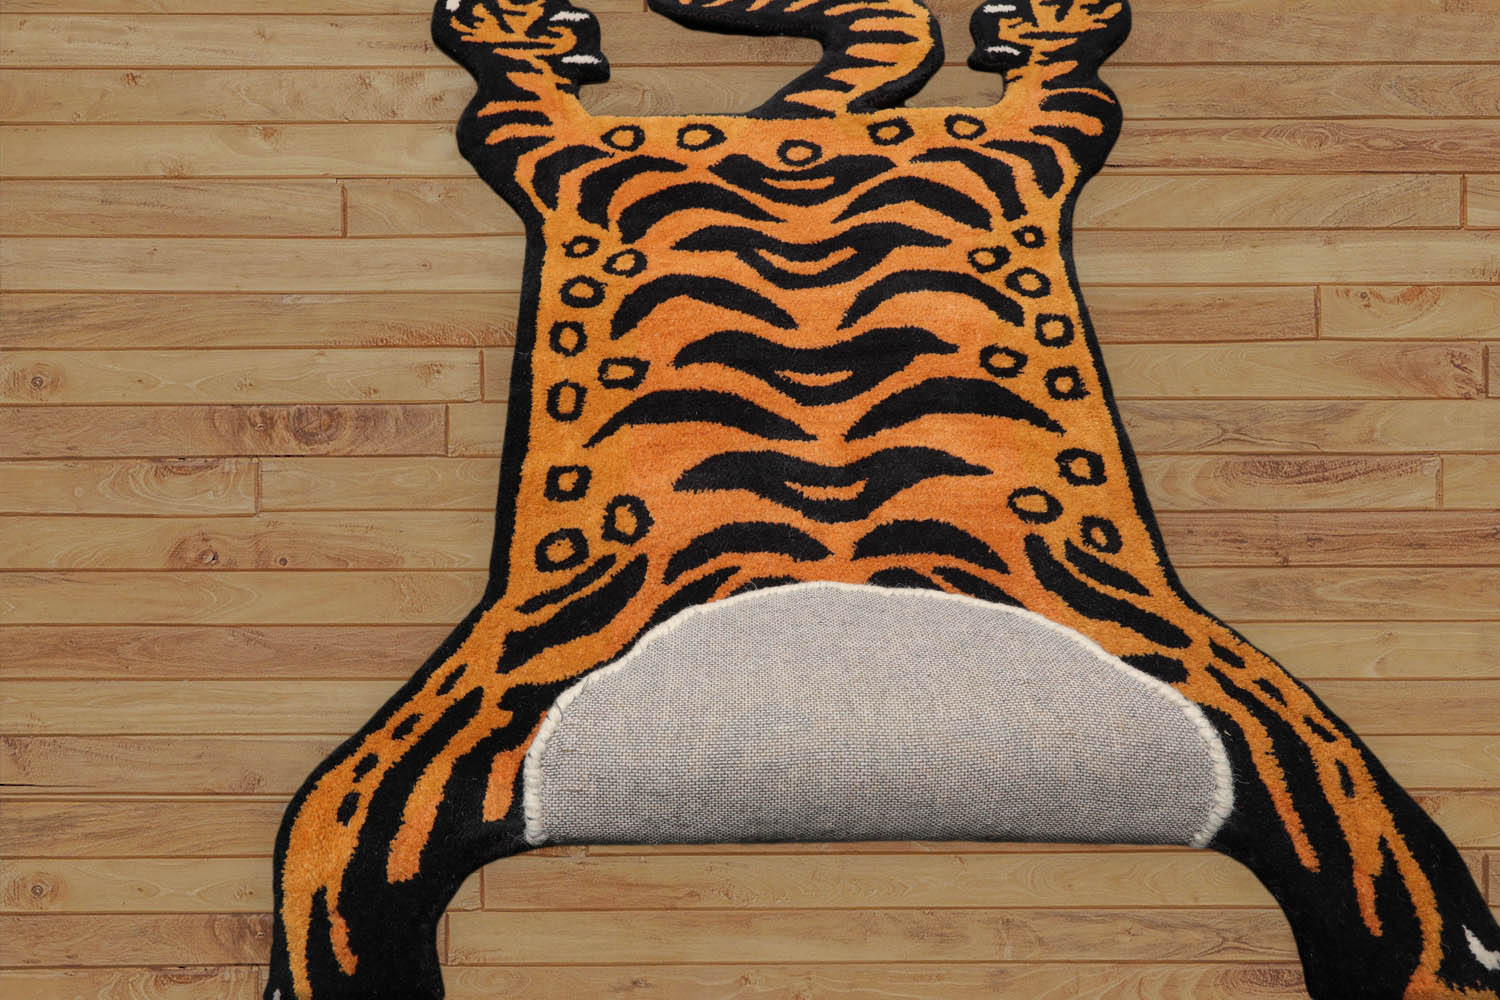 Faheema 3x5 Hand Tufted Hand Made 100% Wool Tiger Novelty Oriental Area Rug Orange, Gold Color